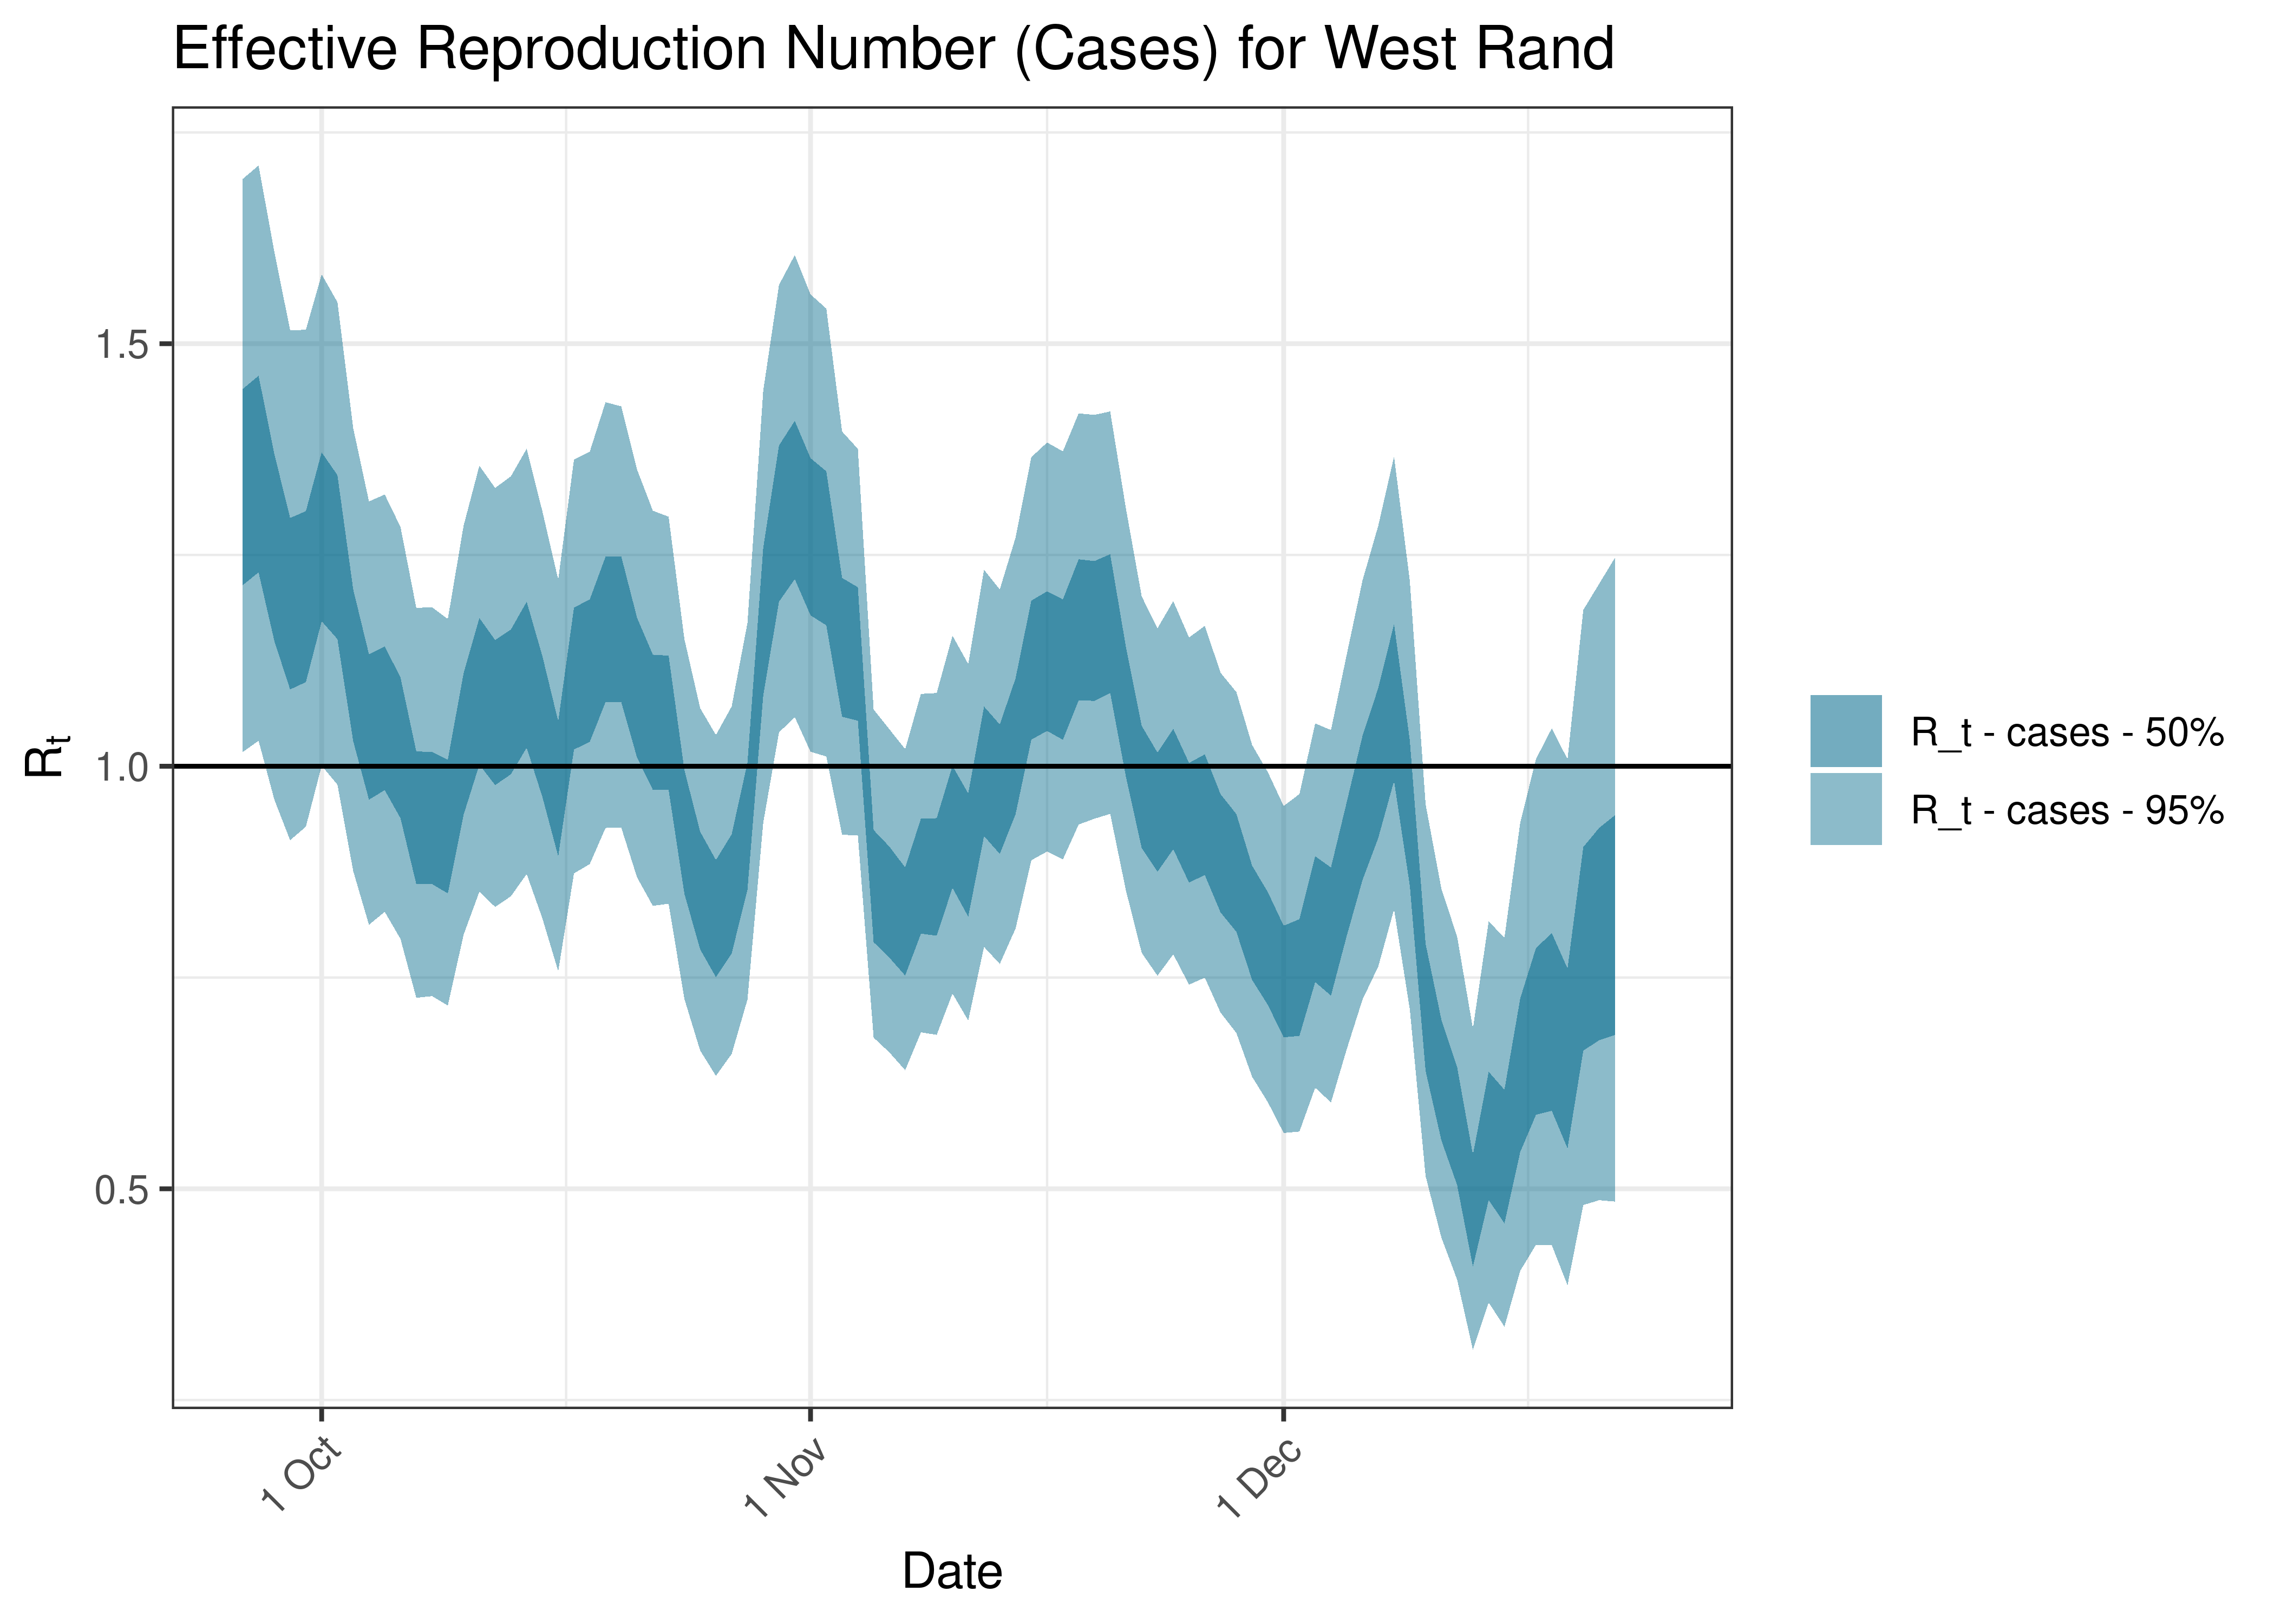 Estimated Effective Reproduction Number Based on Cases for West Rand over last 90 days